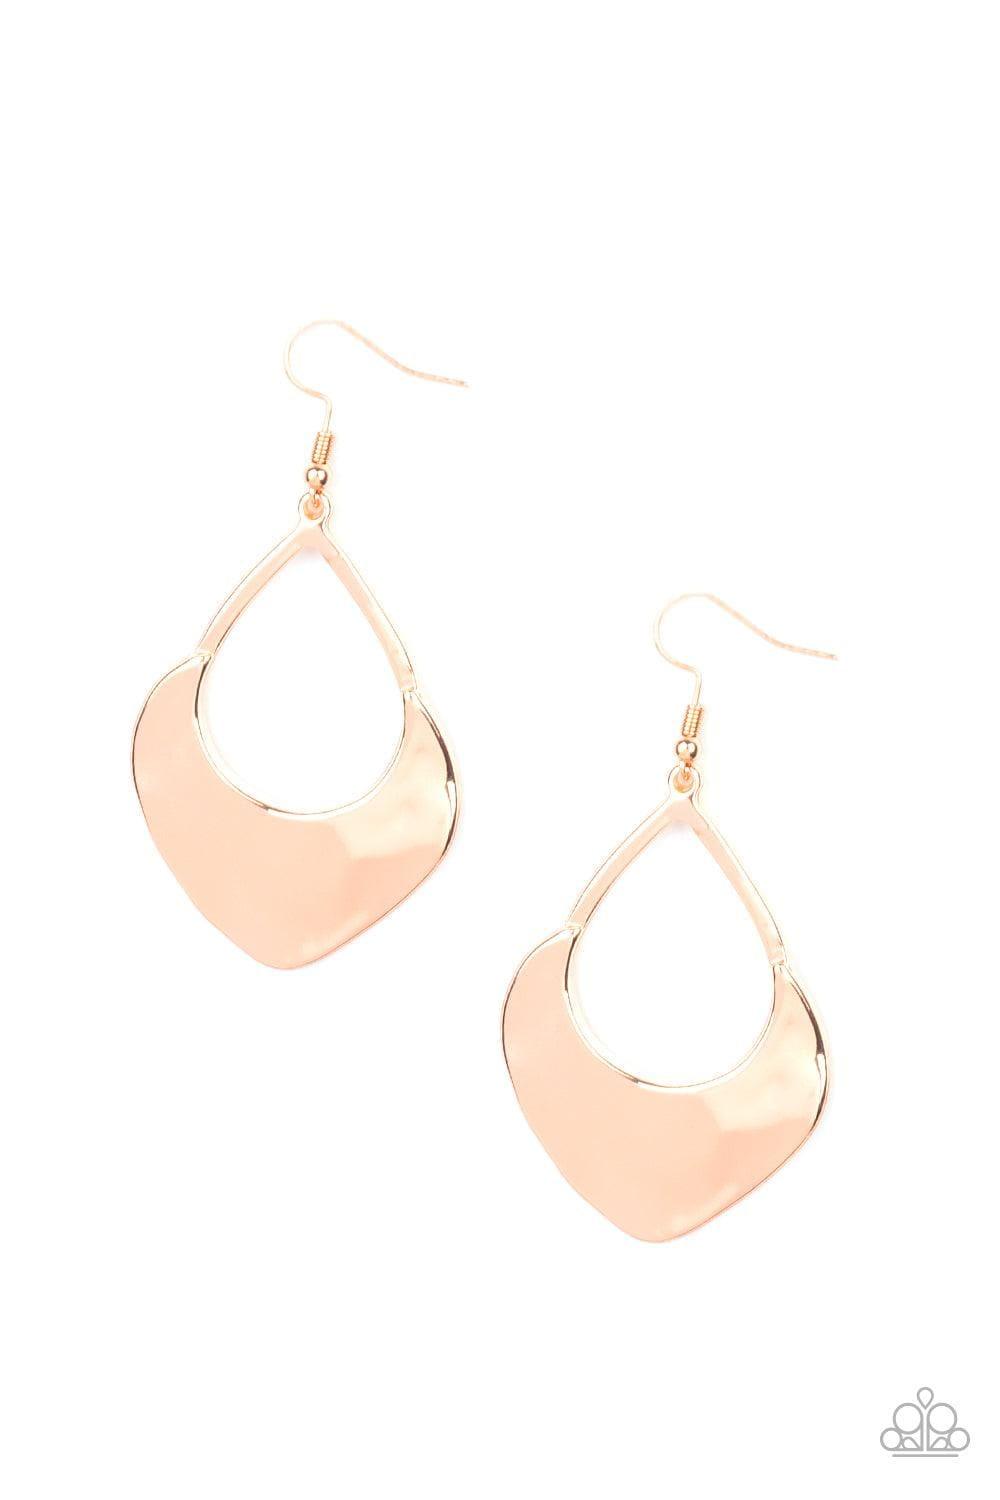 Paparazzi Accessories - Dig Your Heels In - Rose Gold Earrings - Bling by JessieK